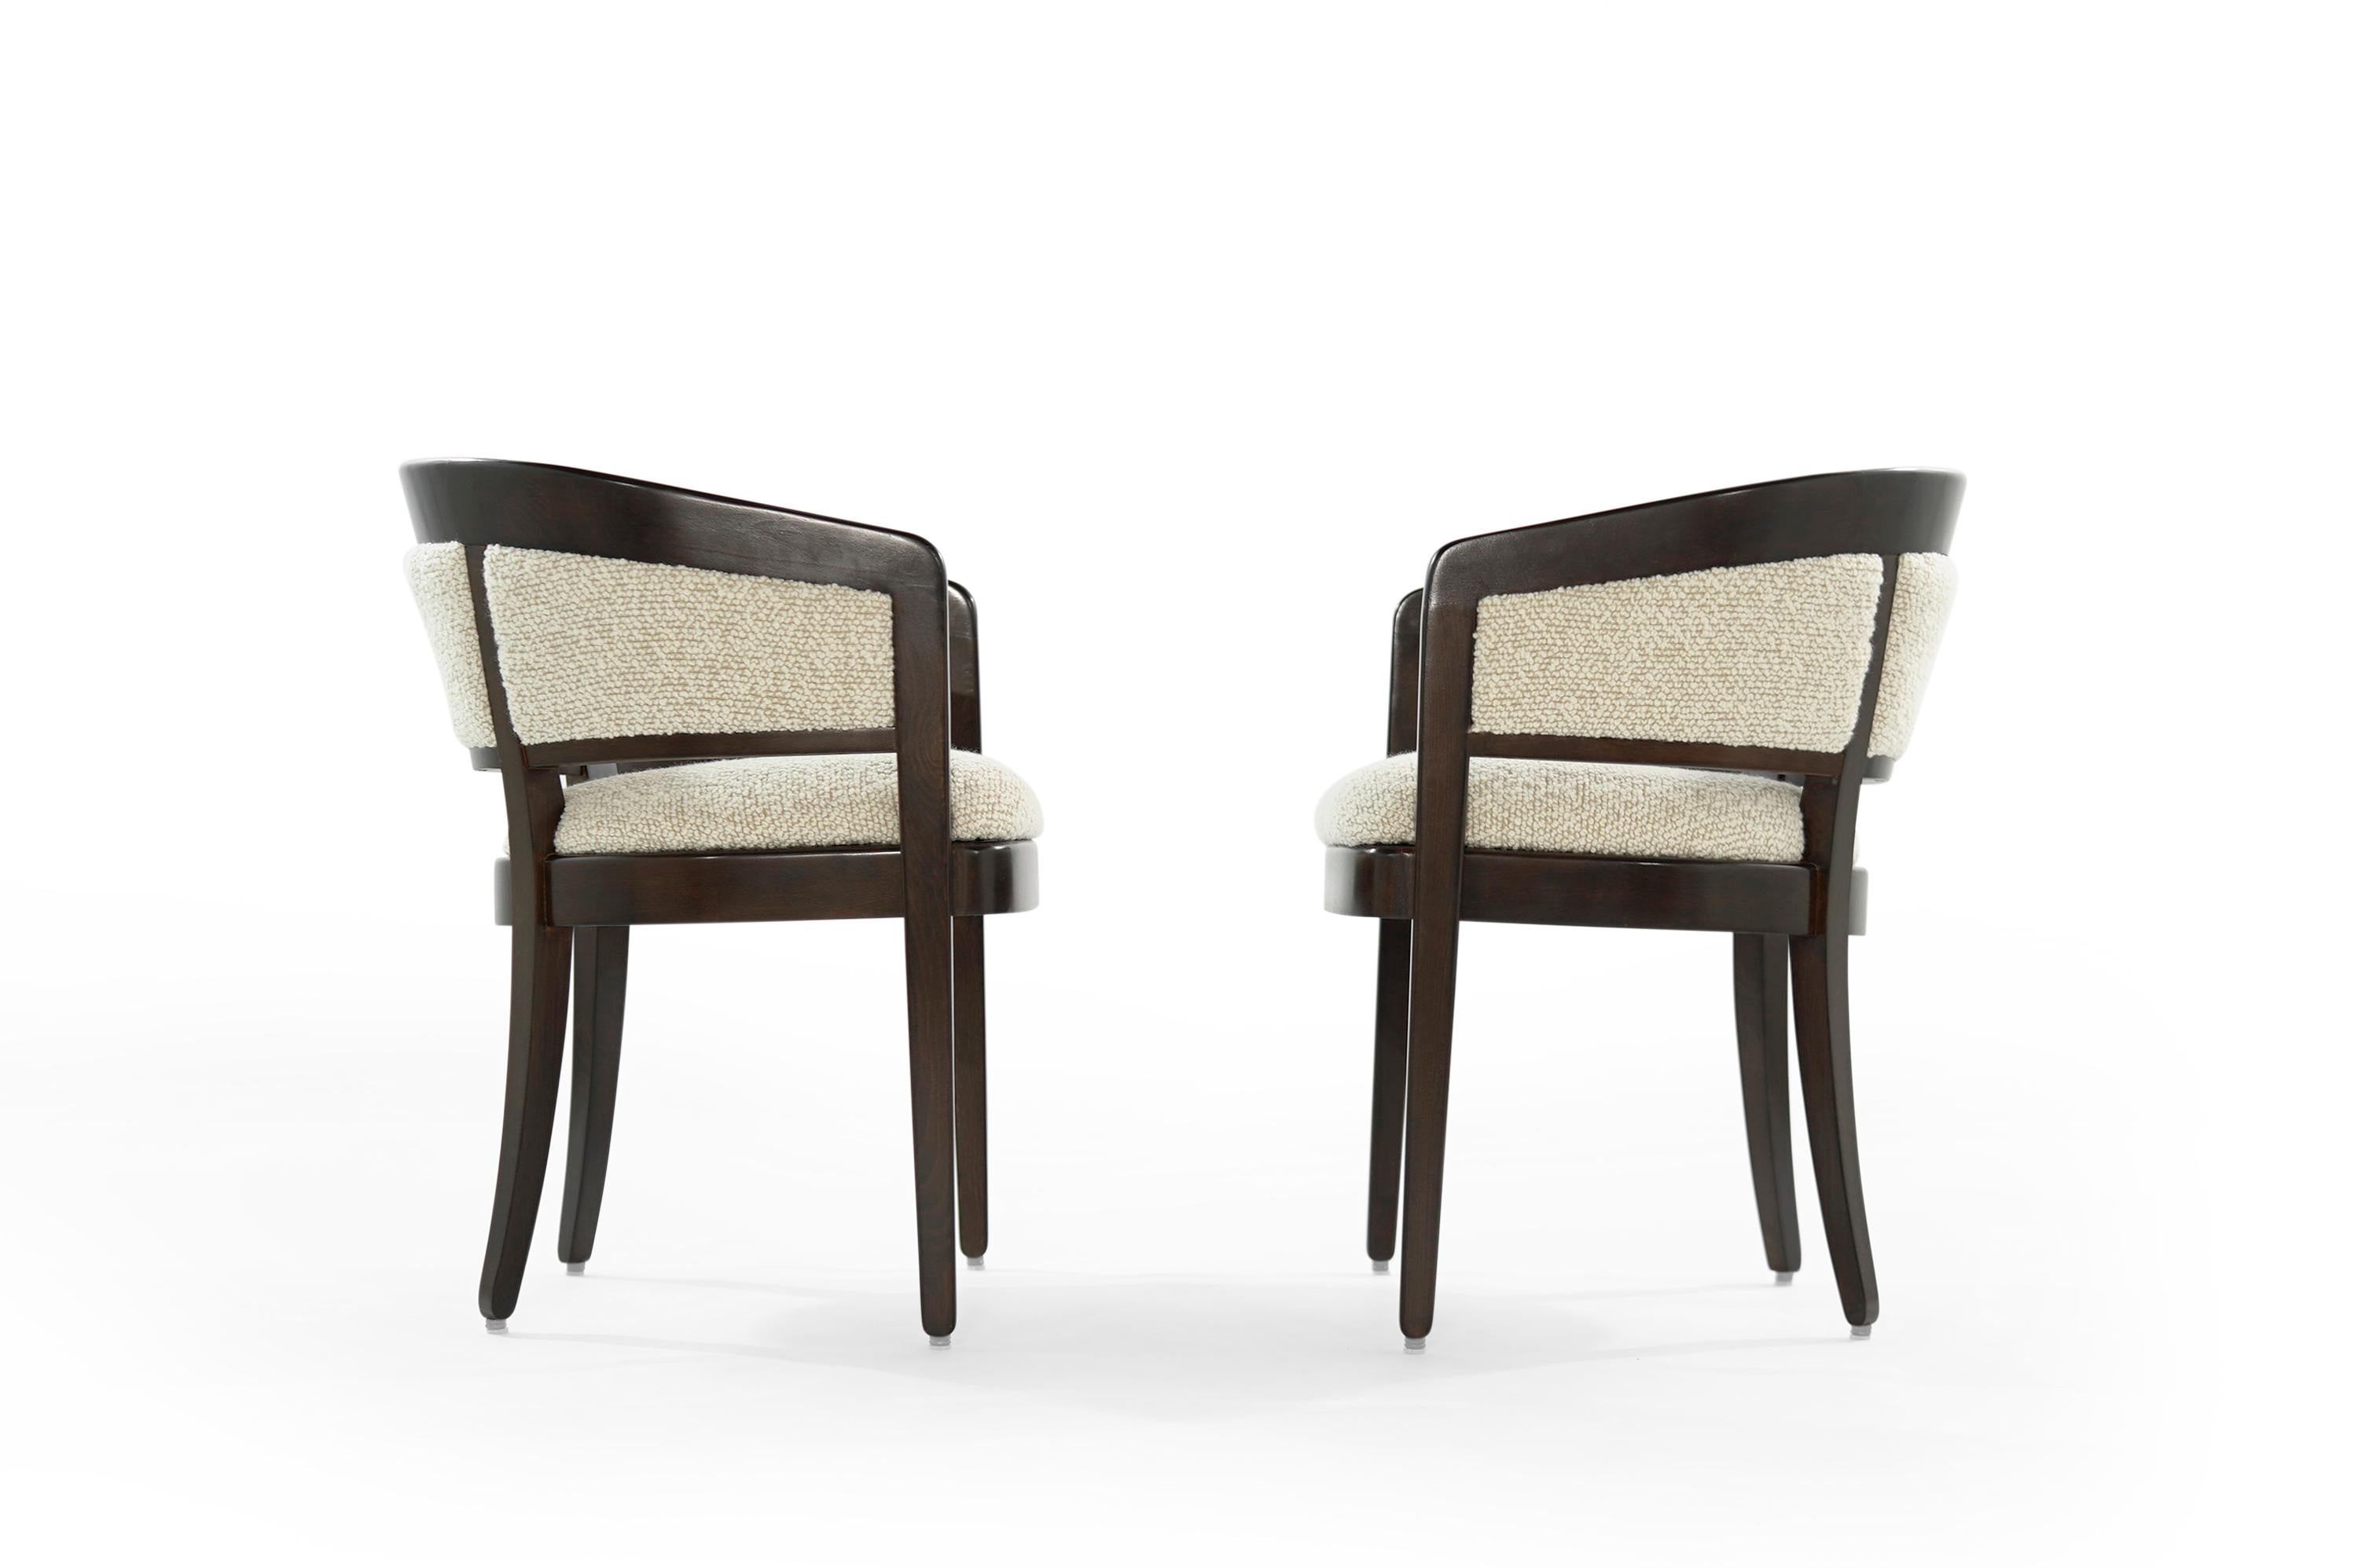 Pair of chairs designed by Edward Wormley and manufactured by Drexel, circa 1960s. Fully restored and refinished in espresso. Newly upholstered in a fantastic wool bouclé by Kravet.